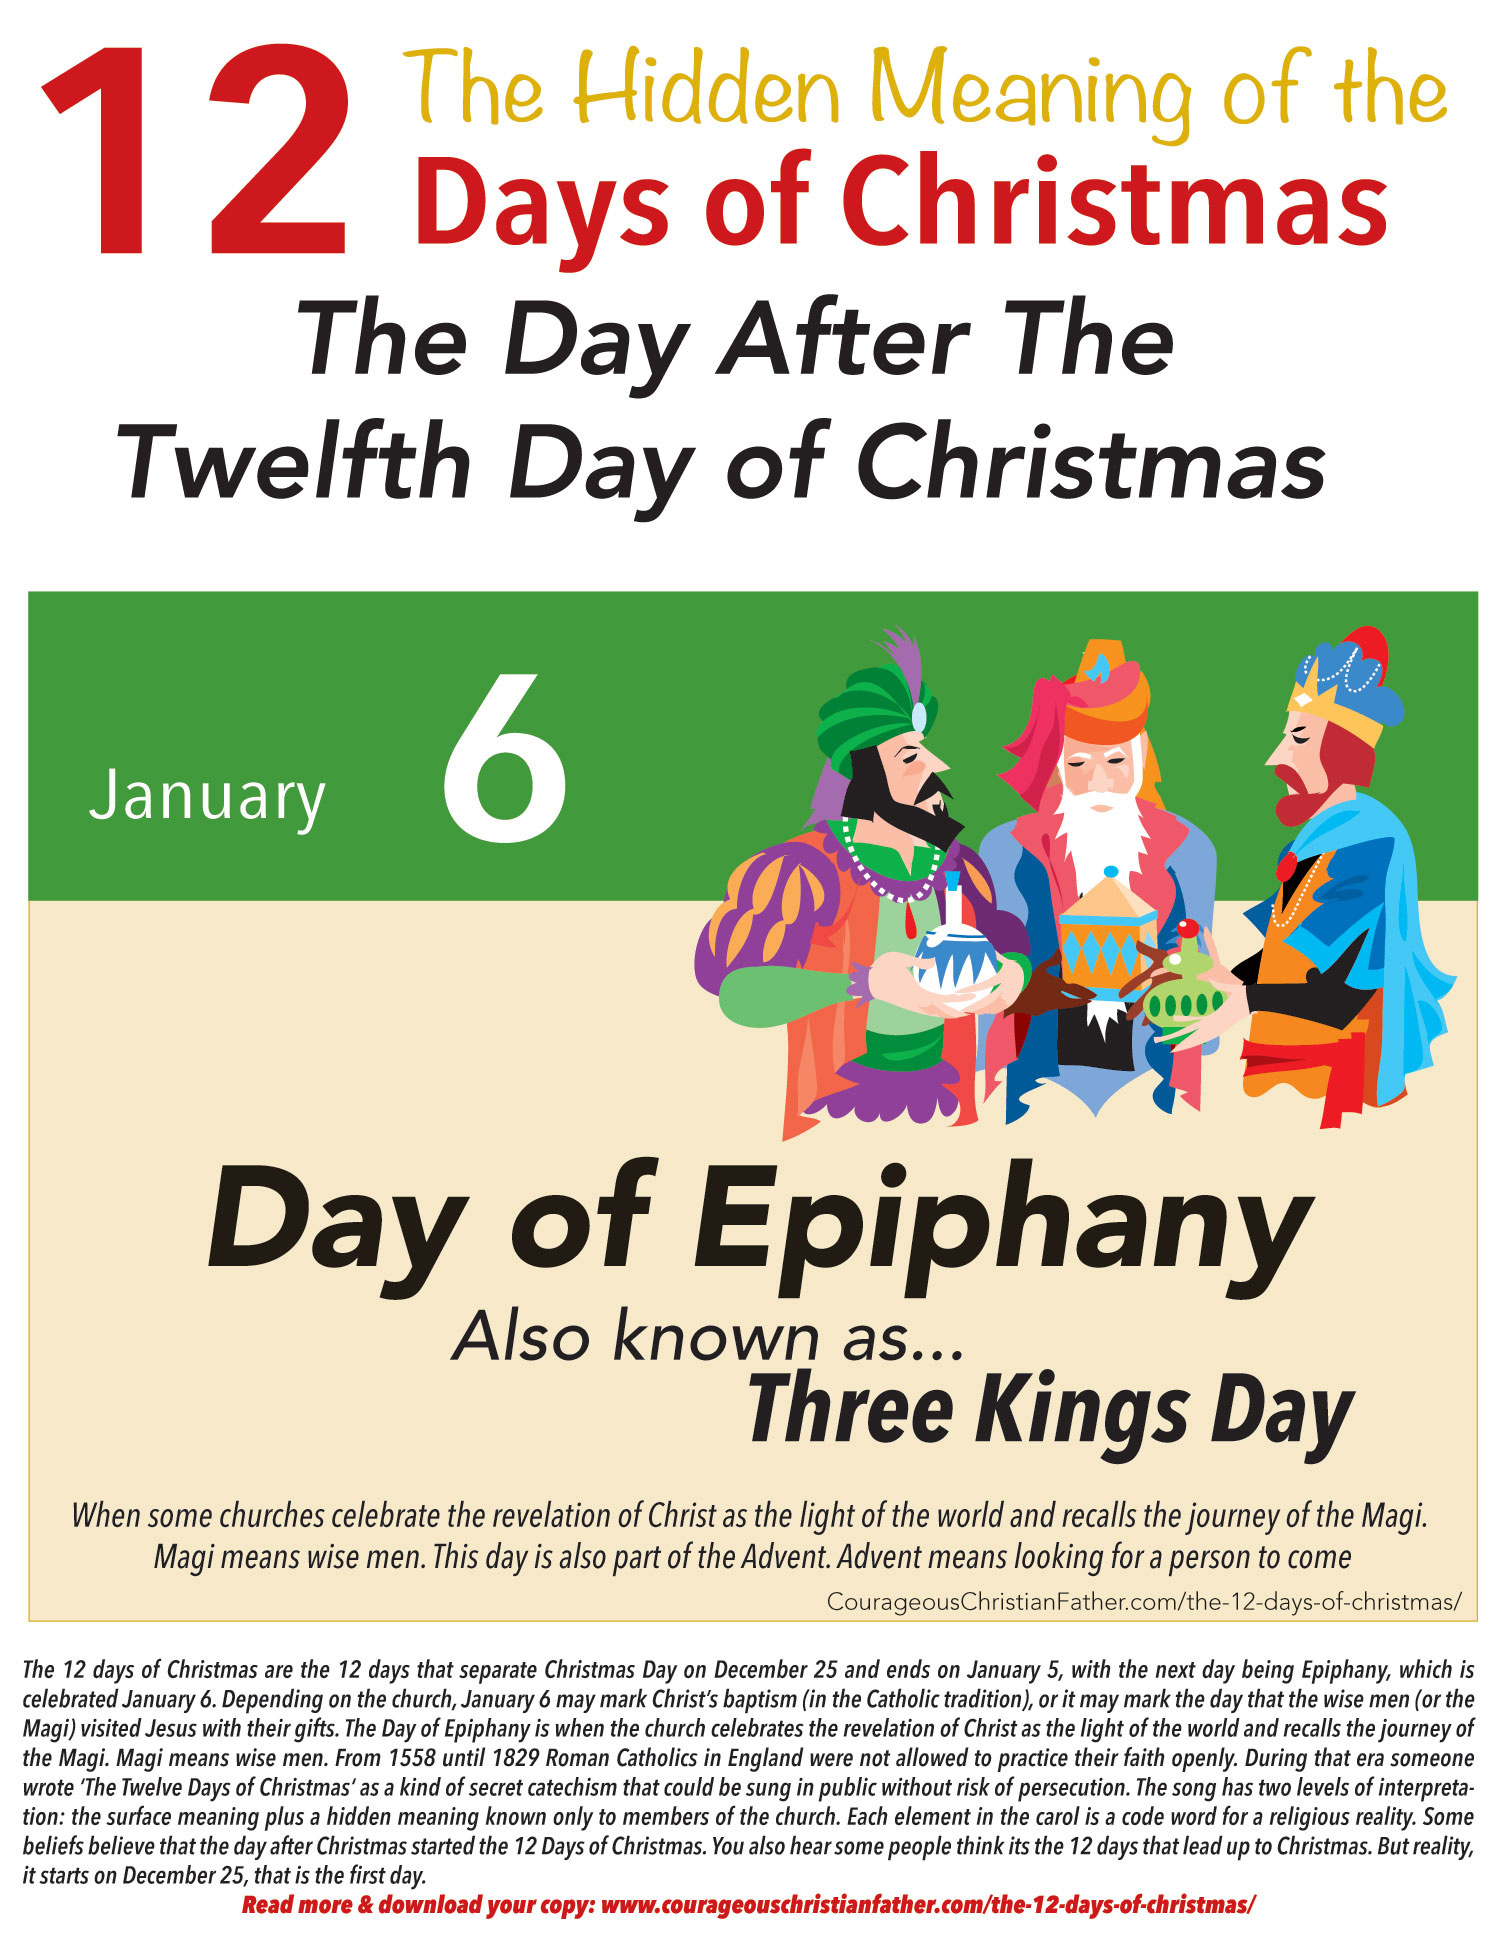 Epiphany is celebrated on January 6 the day after the end of the 12 Days of Christmas. Also known as Three Kings Day. #DayofEpiphany #ThreeKingsDay